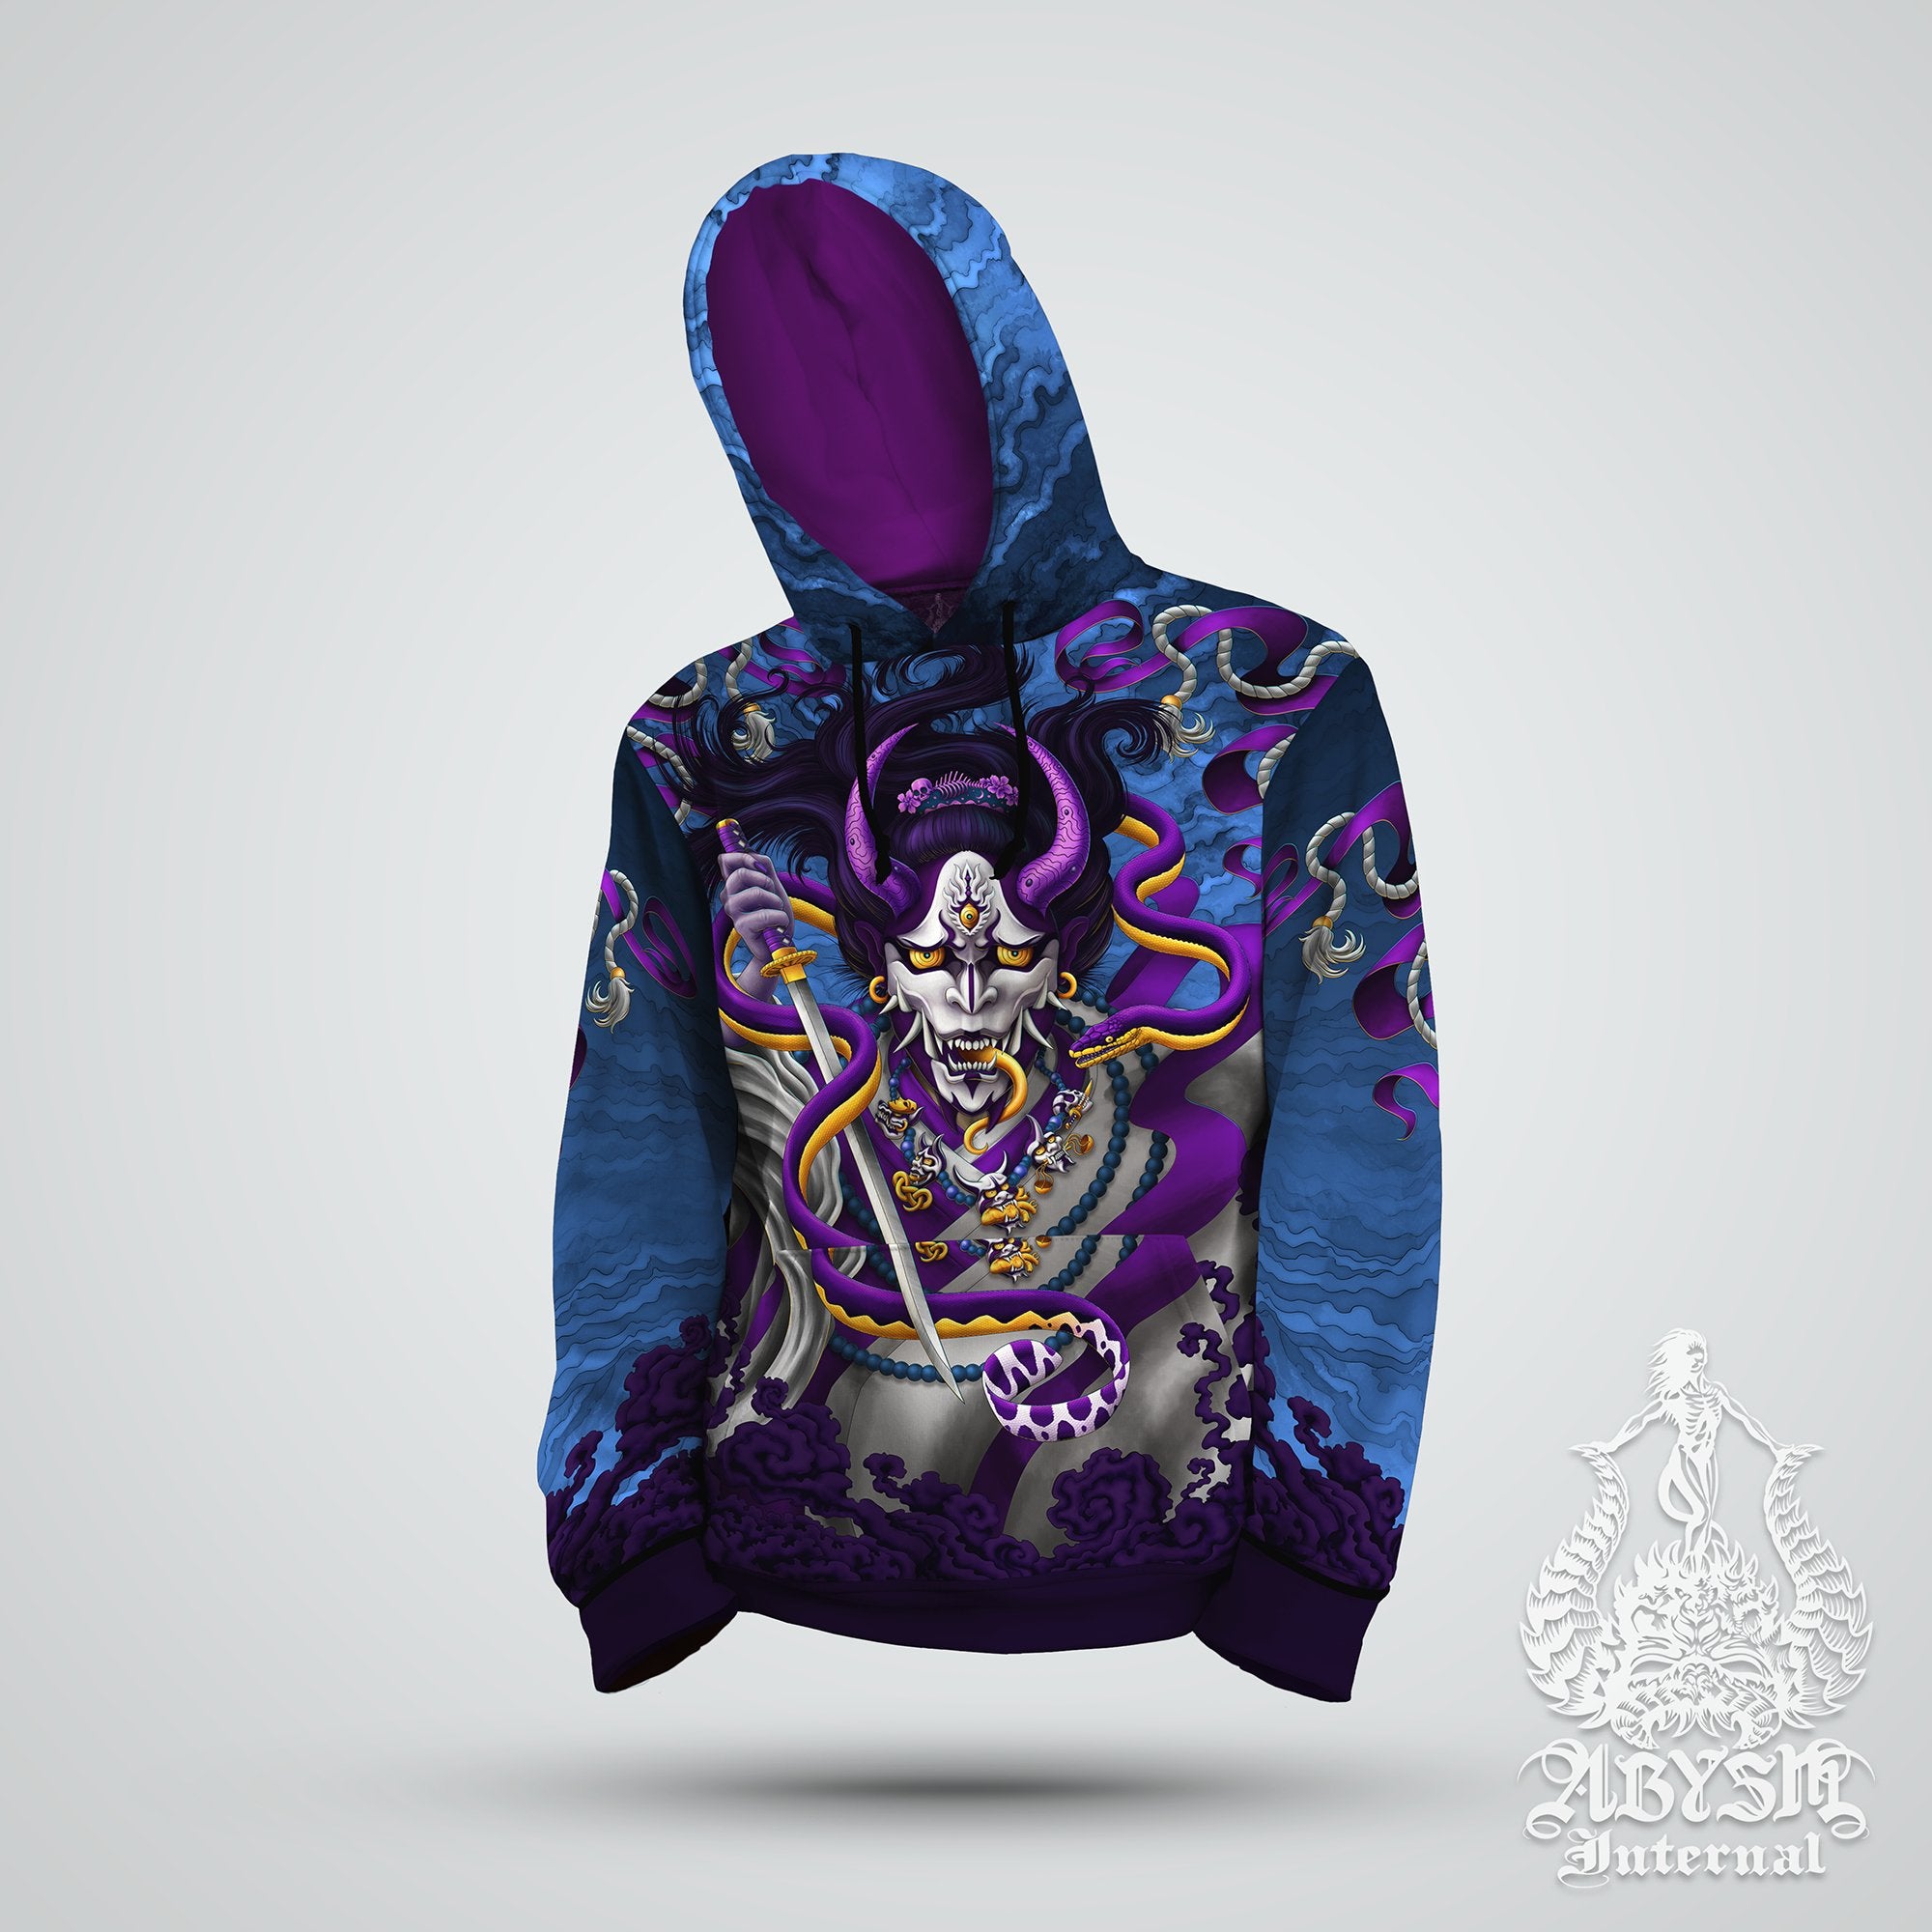 Hannya & Snake Hoodie, Demon Sweater, Anime and Manga Streetwear, Fantasy Street Dancer Outfit, Japanese Oni Pullover, Alternative Clothing, Unisex - Blue and Purple - Abysm Internal